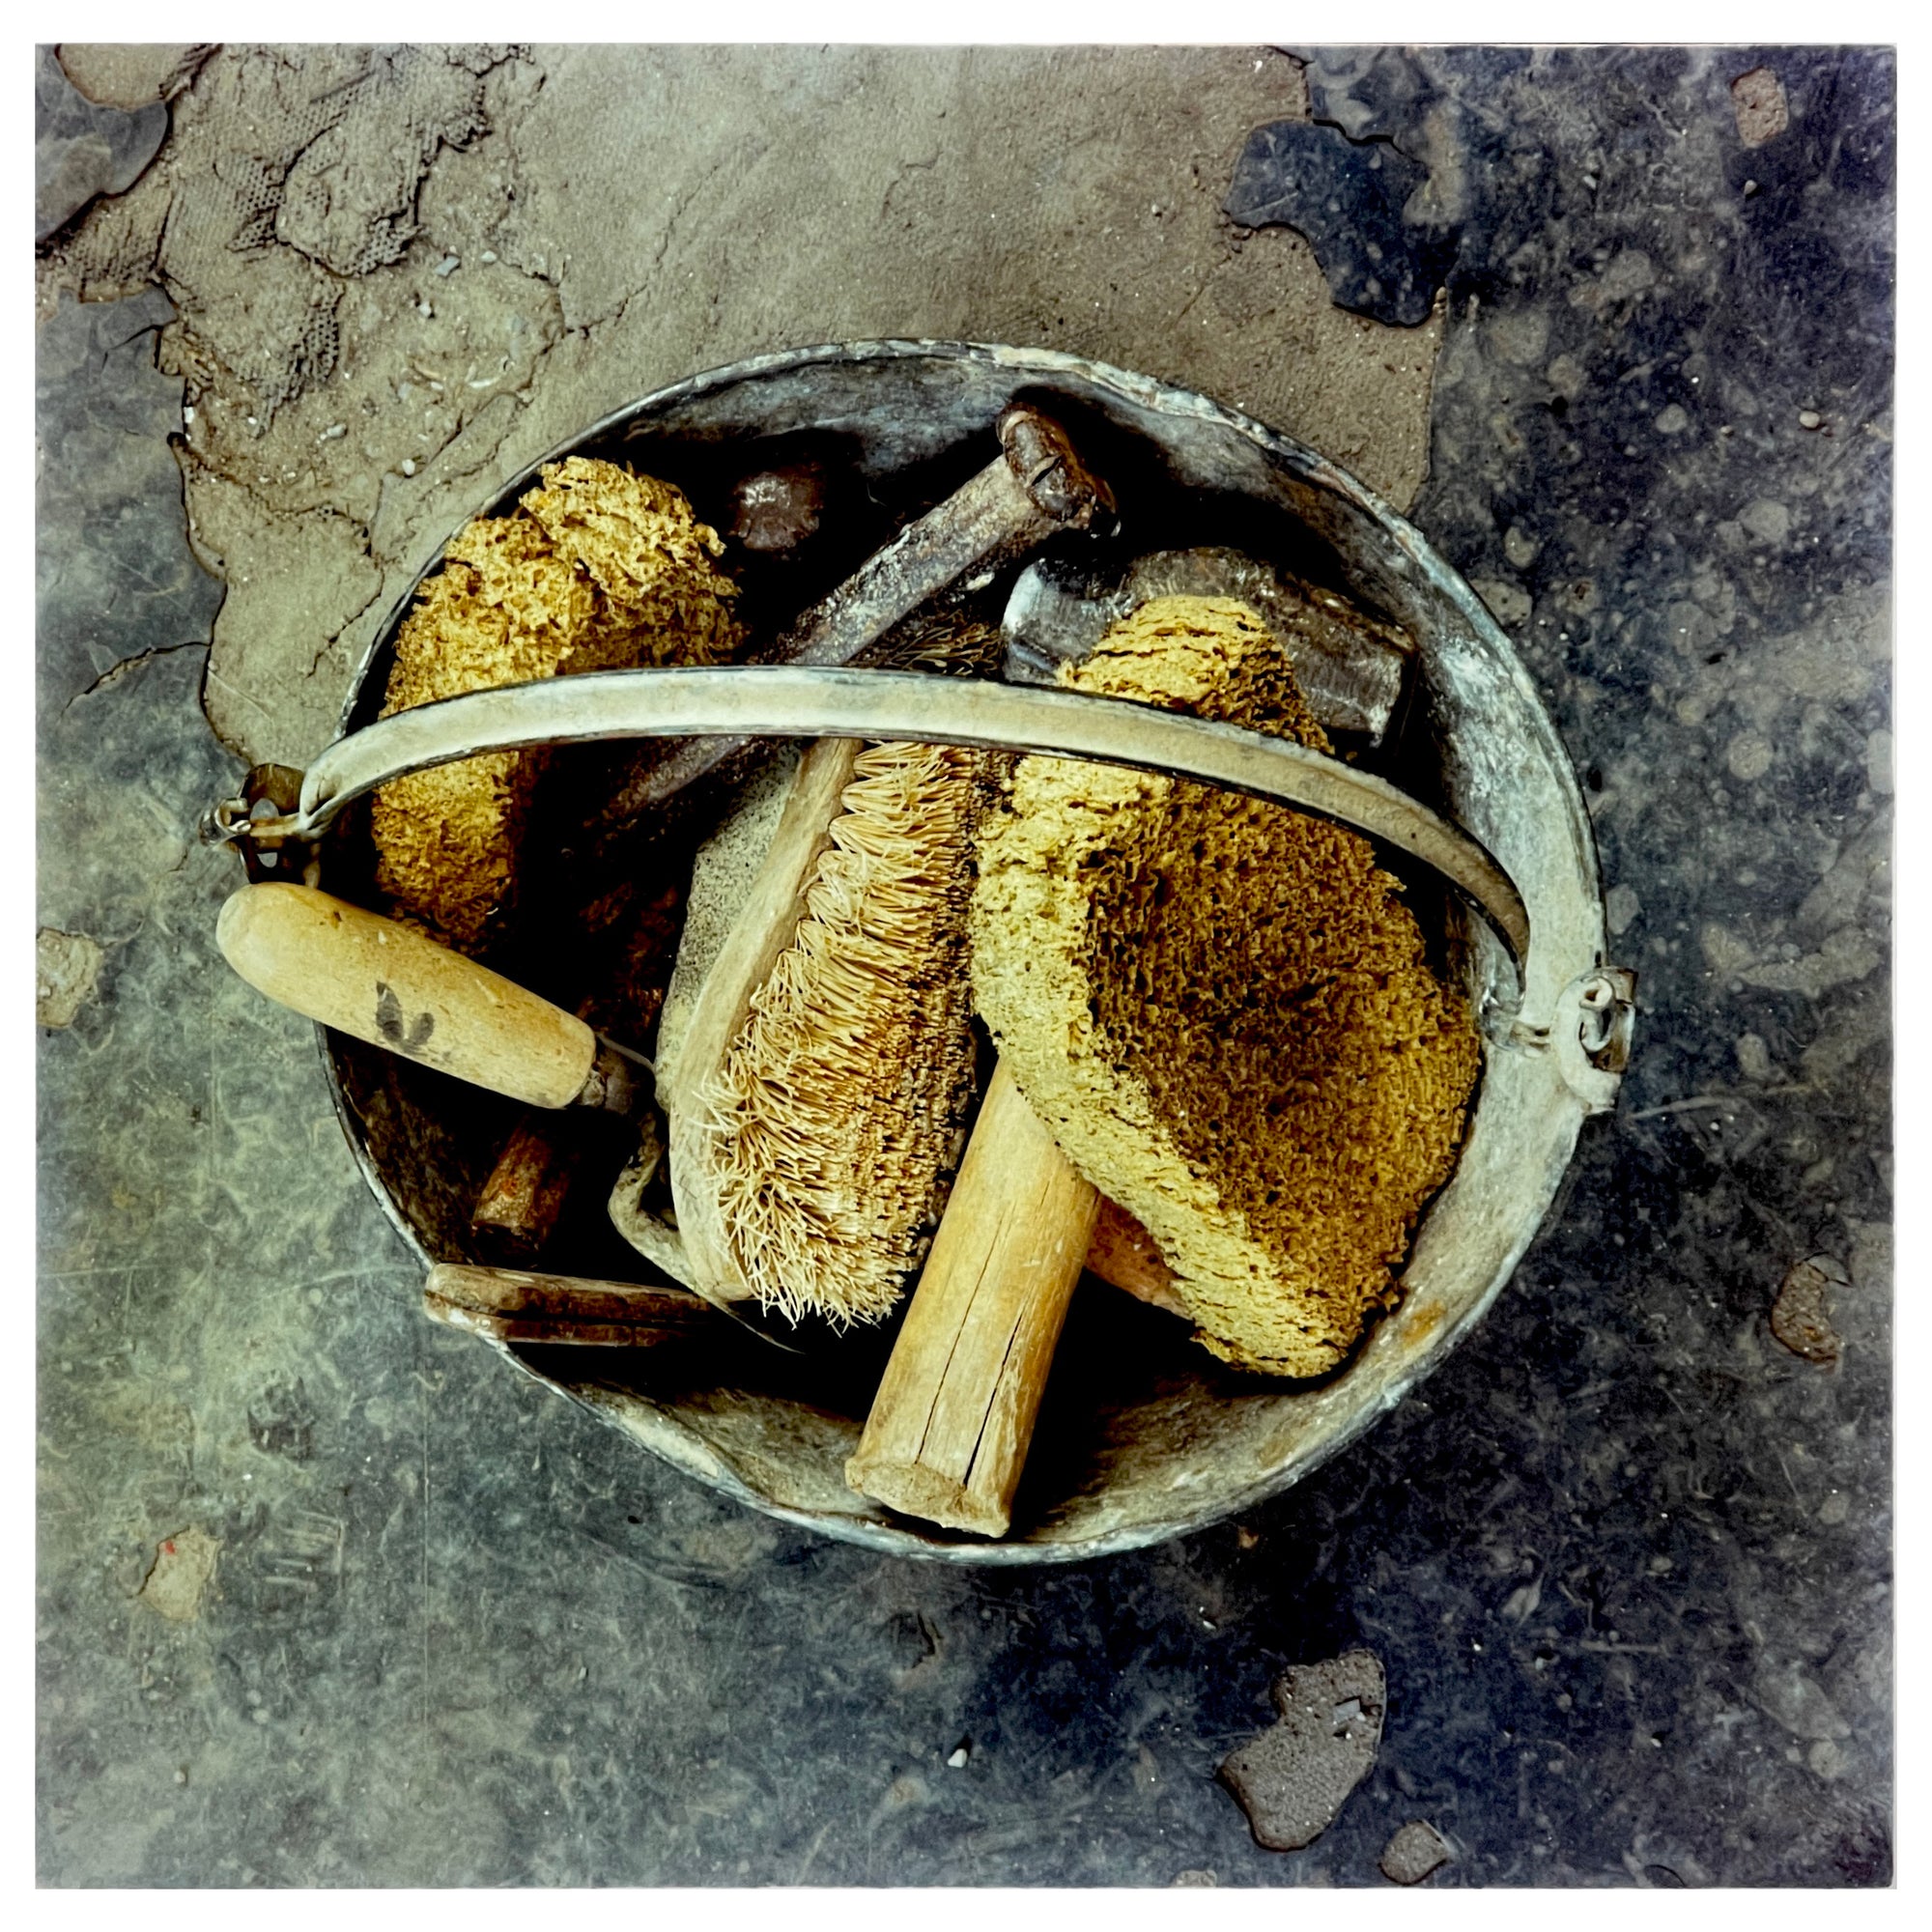 Photograph by Richard Heeps. A bucket with sponges, brushes and wooden handled tools sit in a bucket on a cracked cement floor.